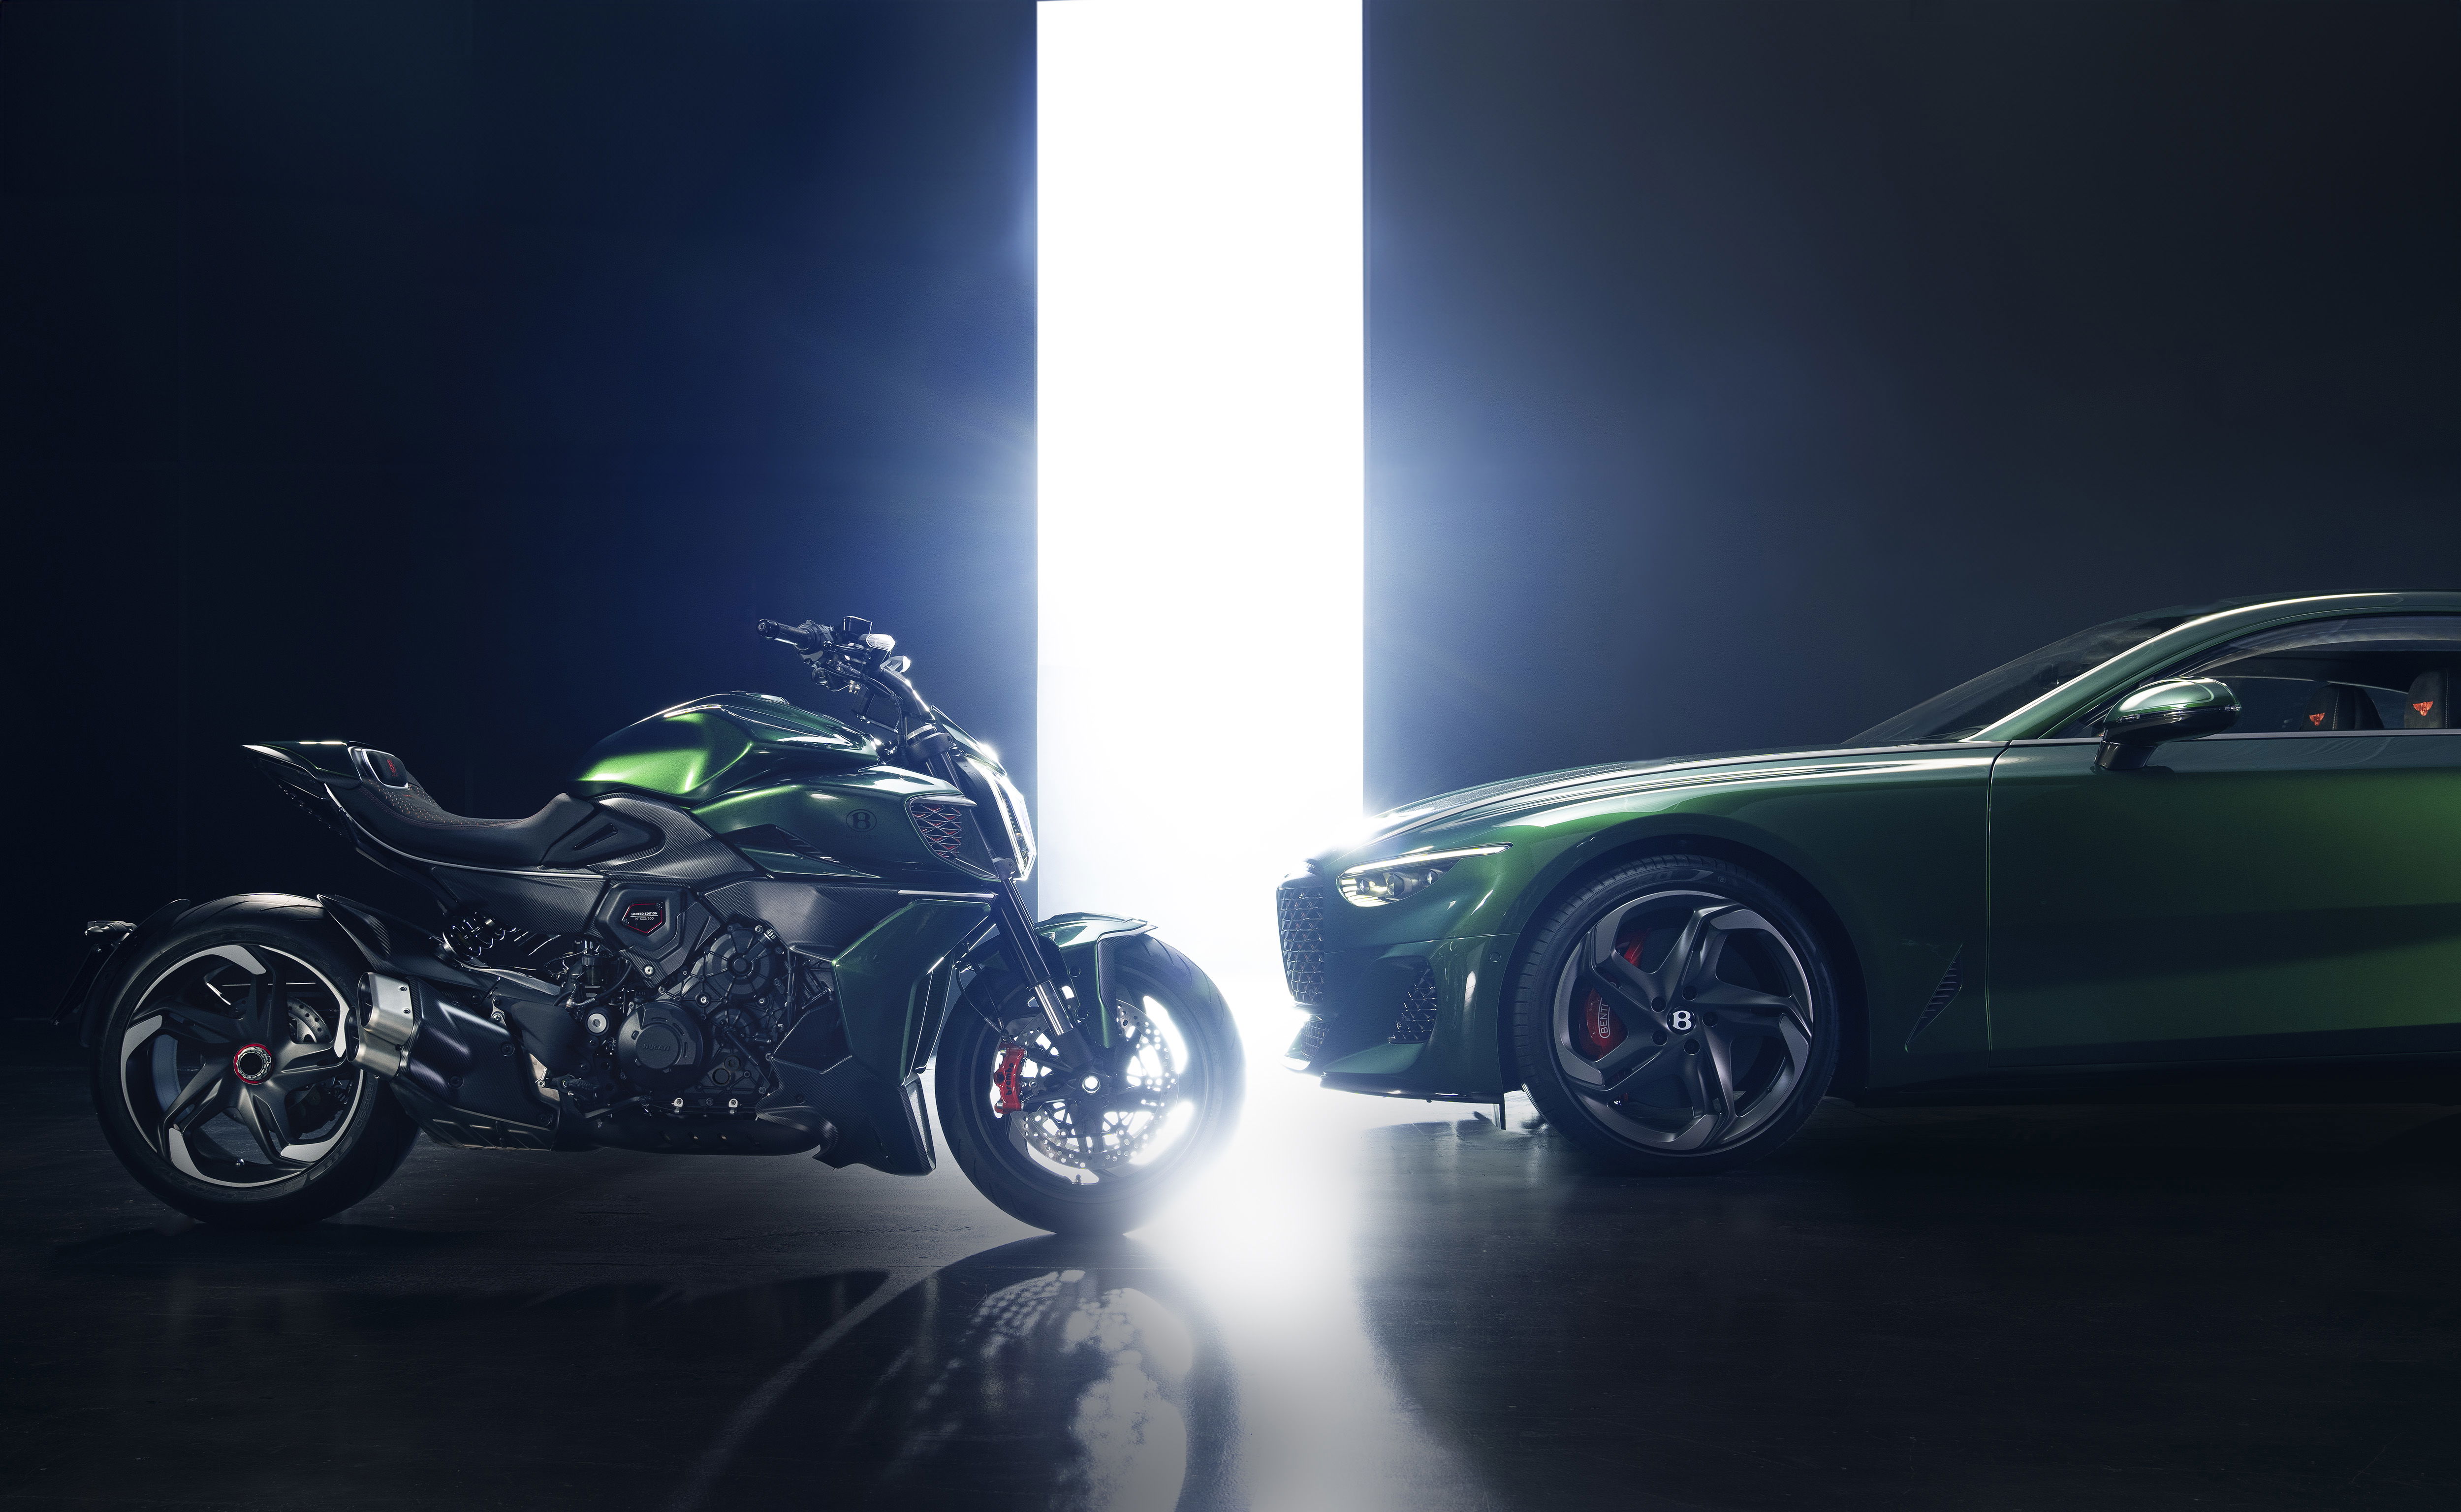 Ducati and Bentley motorcycle collaboration.